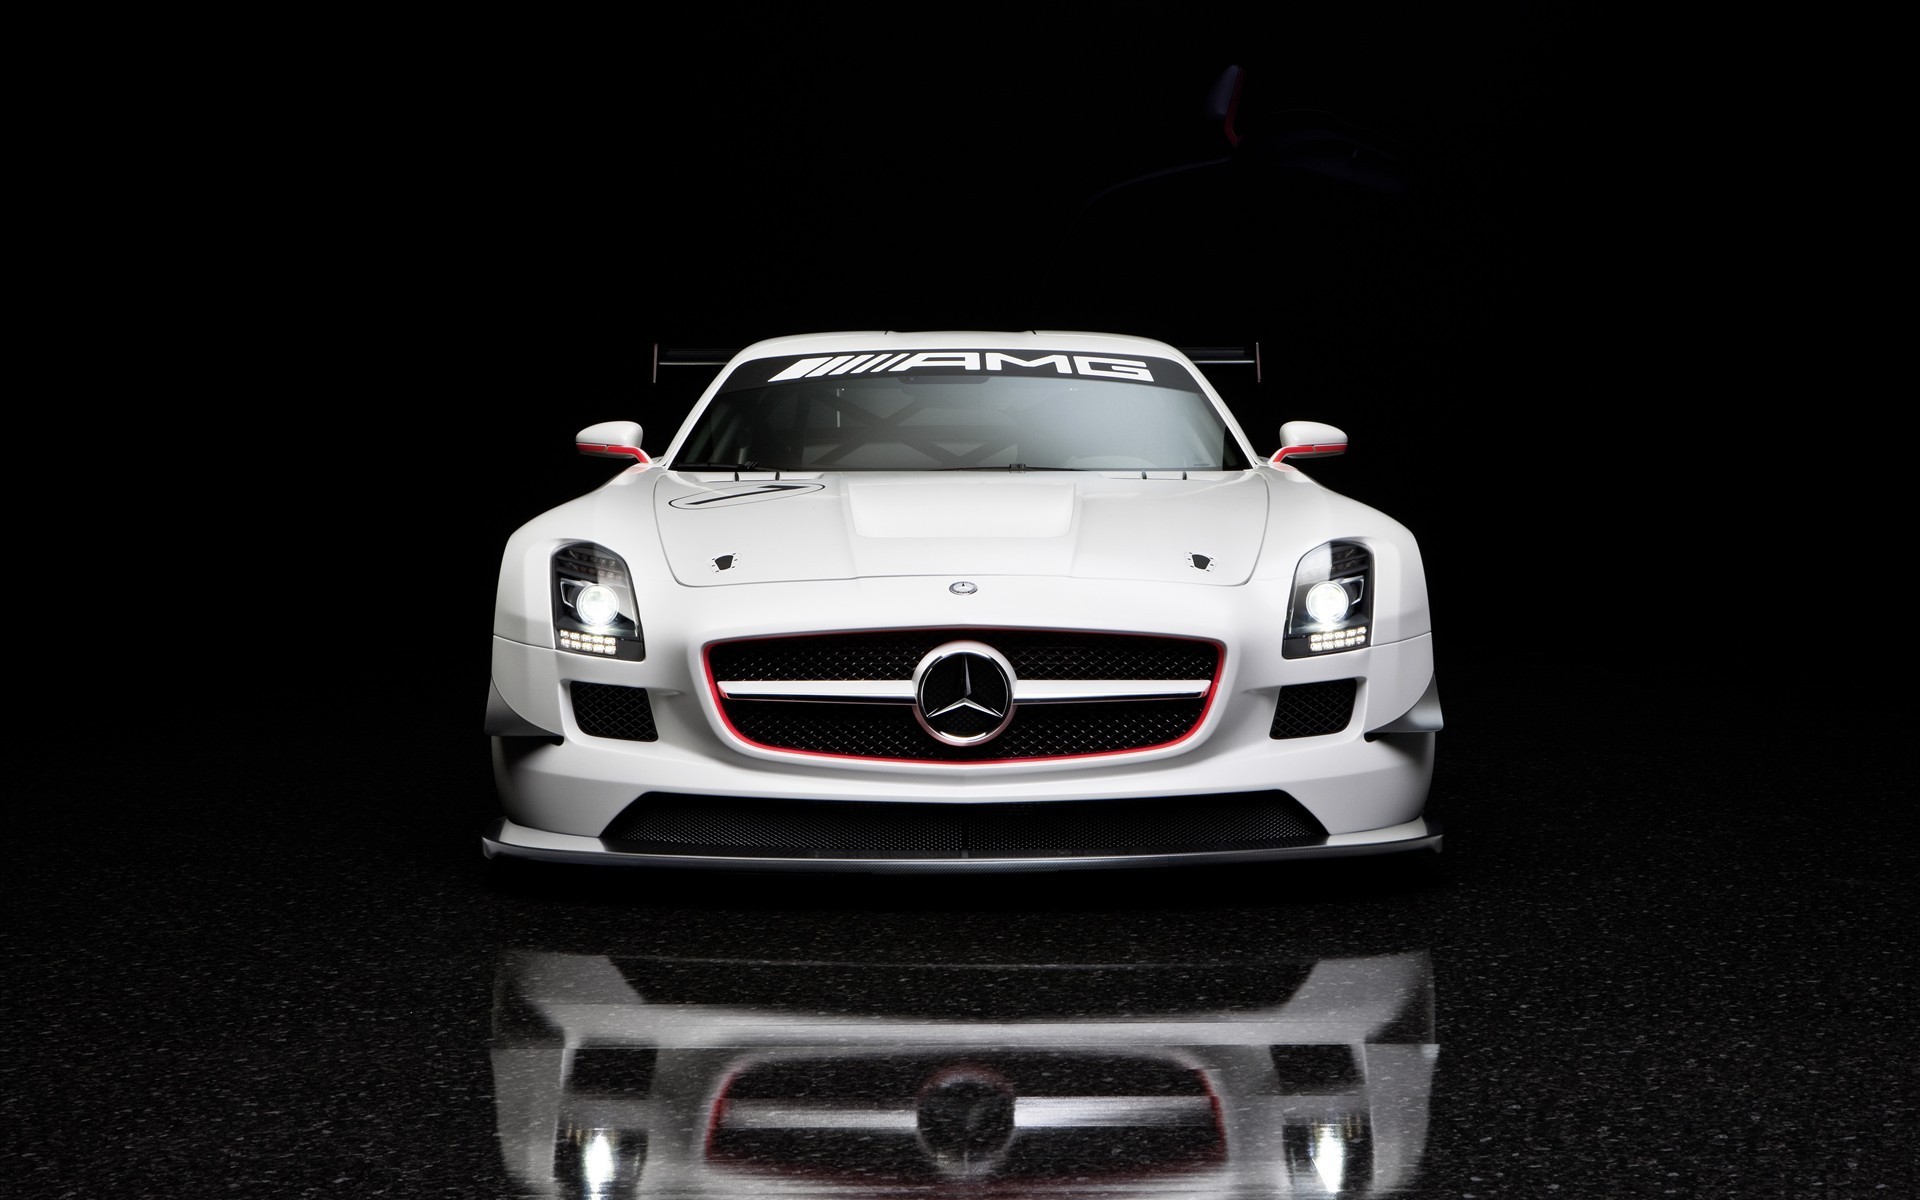 General 1920x1200 car white cars Mercedes-Benz vehicle Mercedes-Benz SLS AMG logo simple background reflection frontal view headlights minimalism